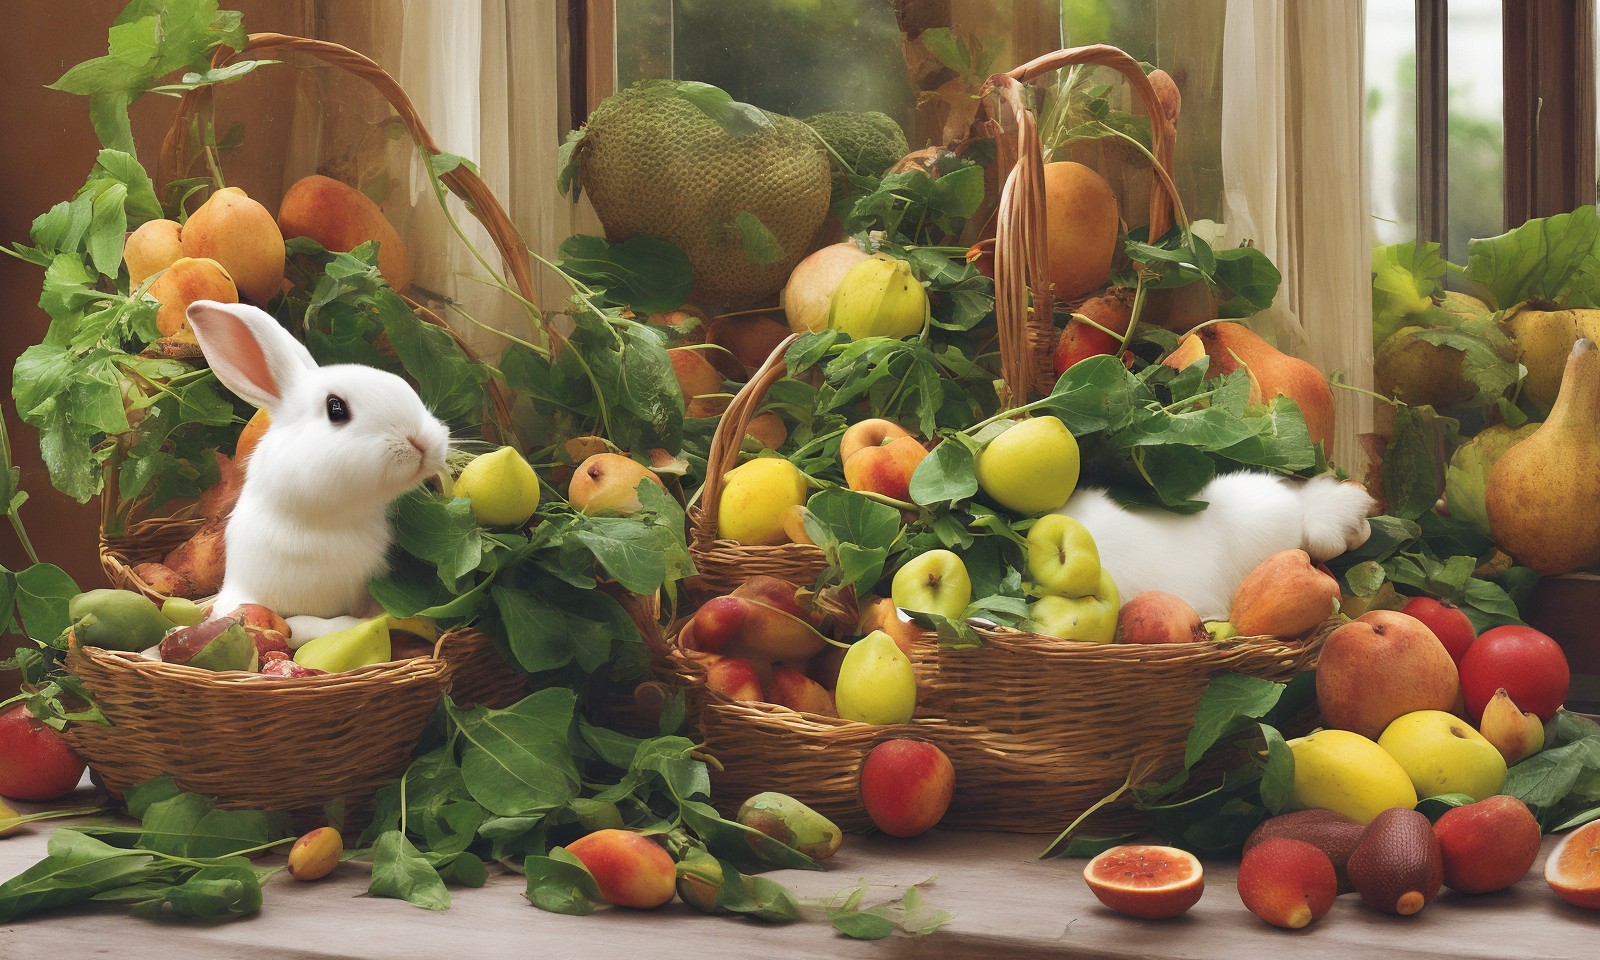 Rabbit in a basket full of fruits